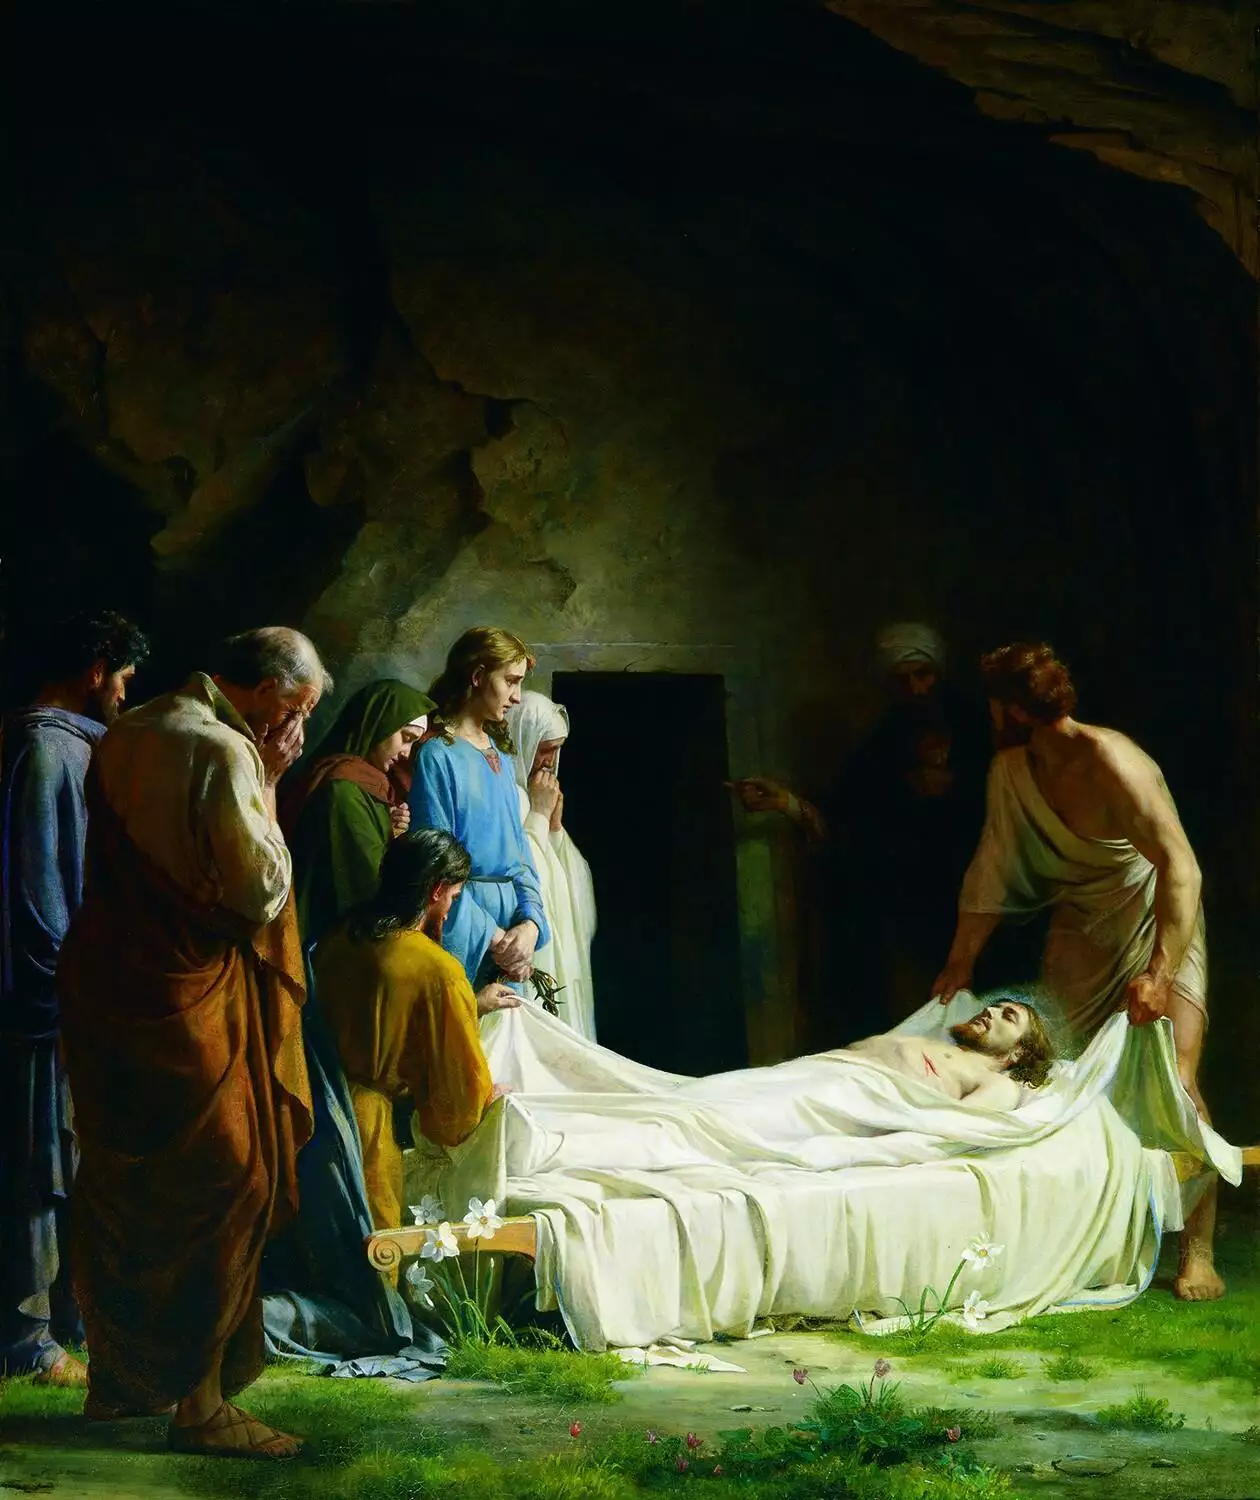 The Burial of Jesus Christ